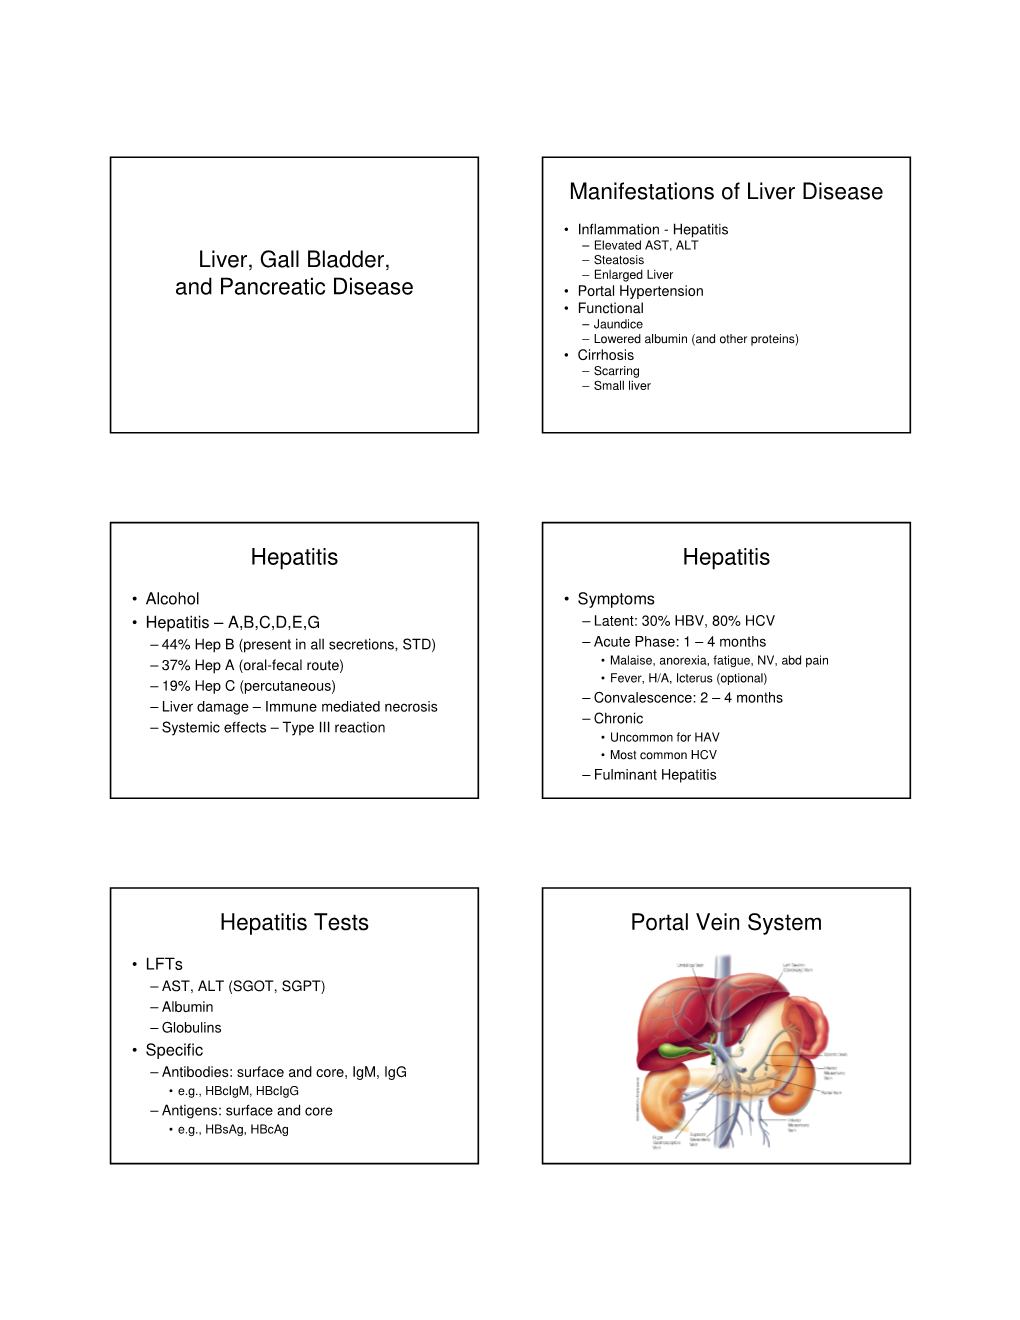 Liver, Gall Bladder, and Pancreatic Disease